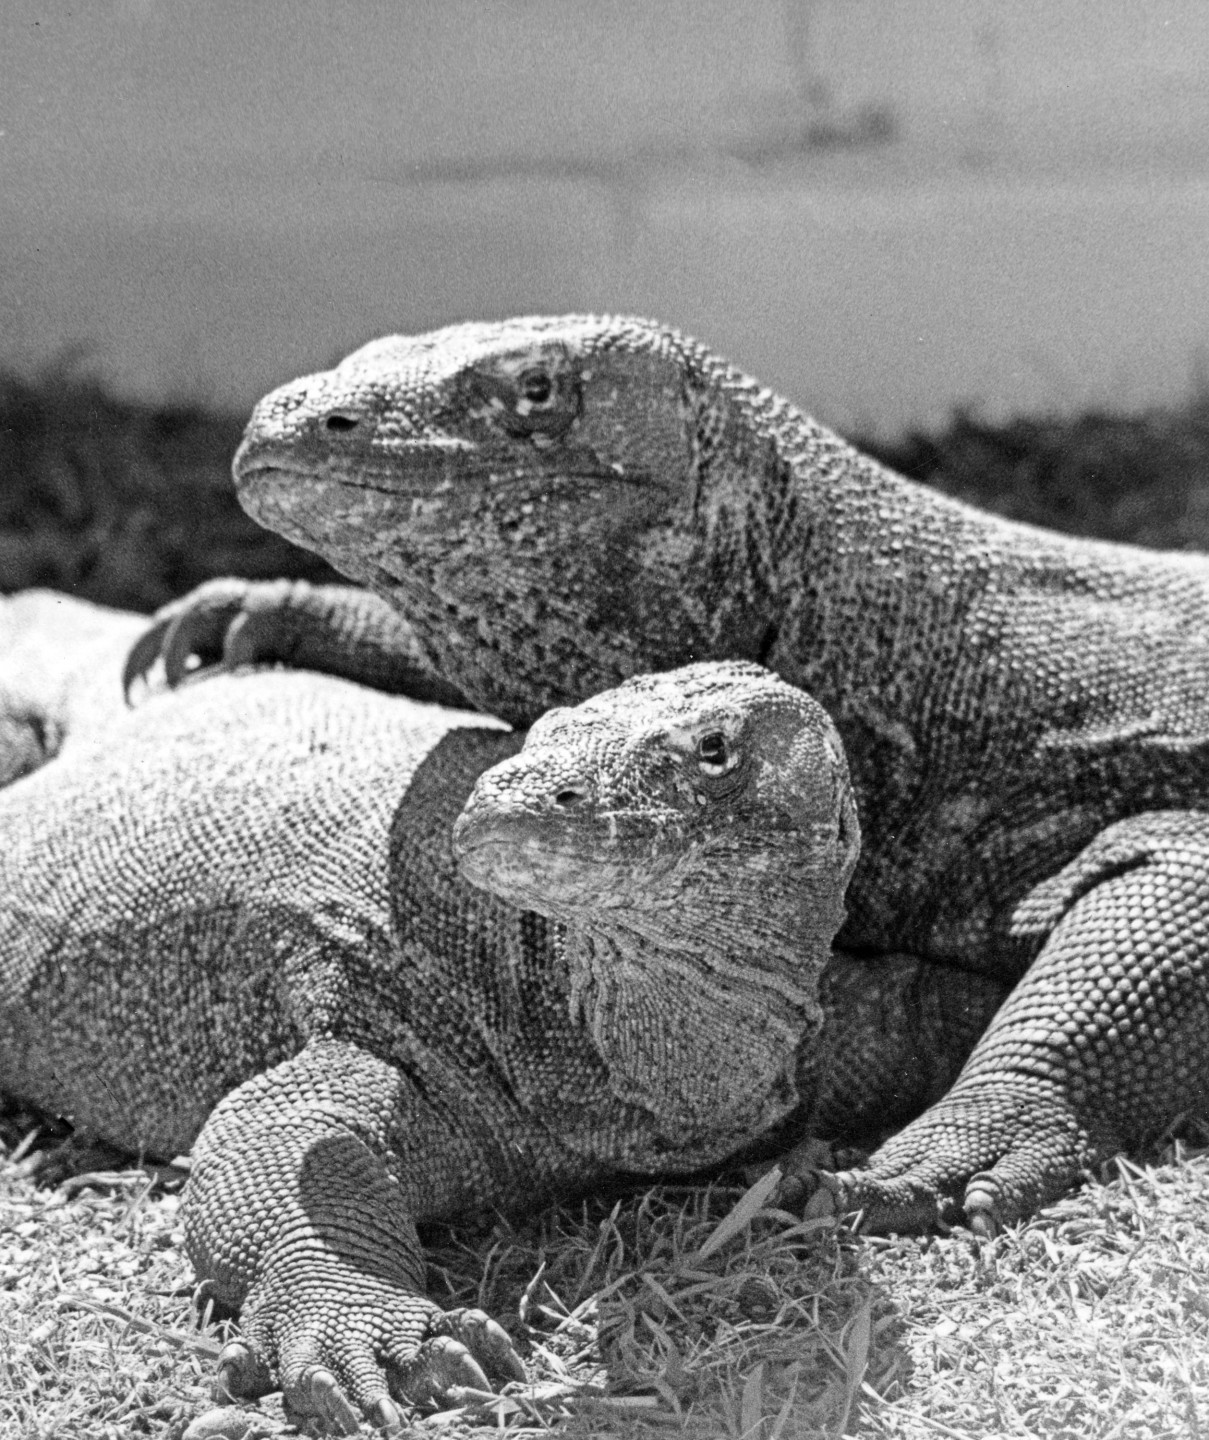 The arrival of two Komodo dragons at the Reptile House at 2 a.m. on August 14, 1963 was the culmination of several years of negotiations with the Surabaya Zoo in Indonesia. Carefully protected, these monitor lizards could only be obtained with the permission of the Indonesian government, which rarely issued such permits. The two were advertised to be a male and female pair; and since it required a surgical procedure in those days to verify the sex, the Zoo went by the accompanying records. However, there was no observed breeding and no offspring. It wasn't until many years later, when the Zoo's Center for Reproduction of Endangered Species developed a hormone analysis technique to determine sex in lizards, that the dragons were discovered to both be females—much to the staff's annoyance. A male was then added to the collection in 1976 to remedy the breeding situation.